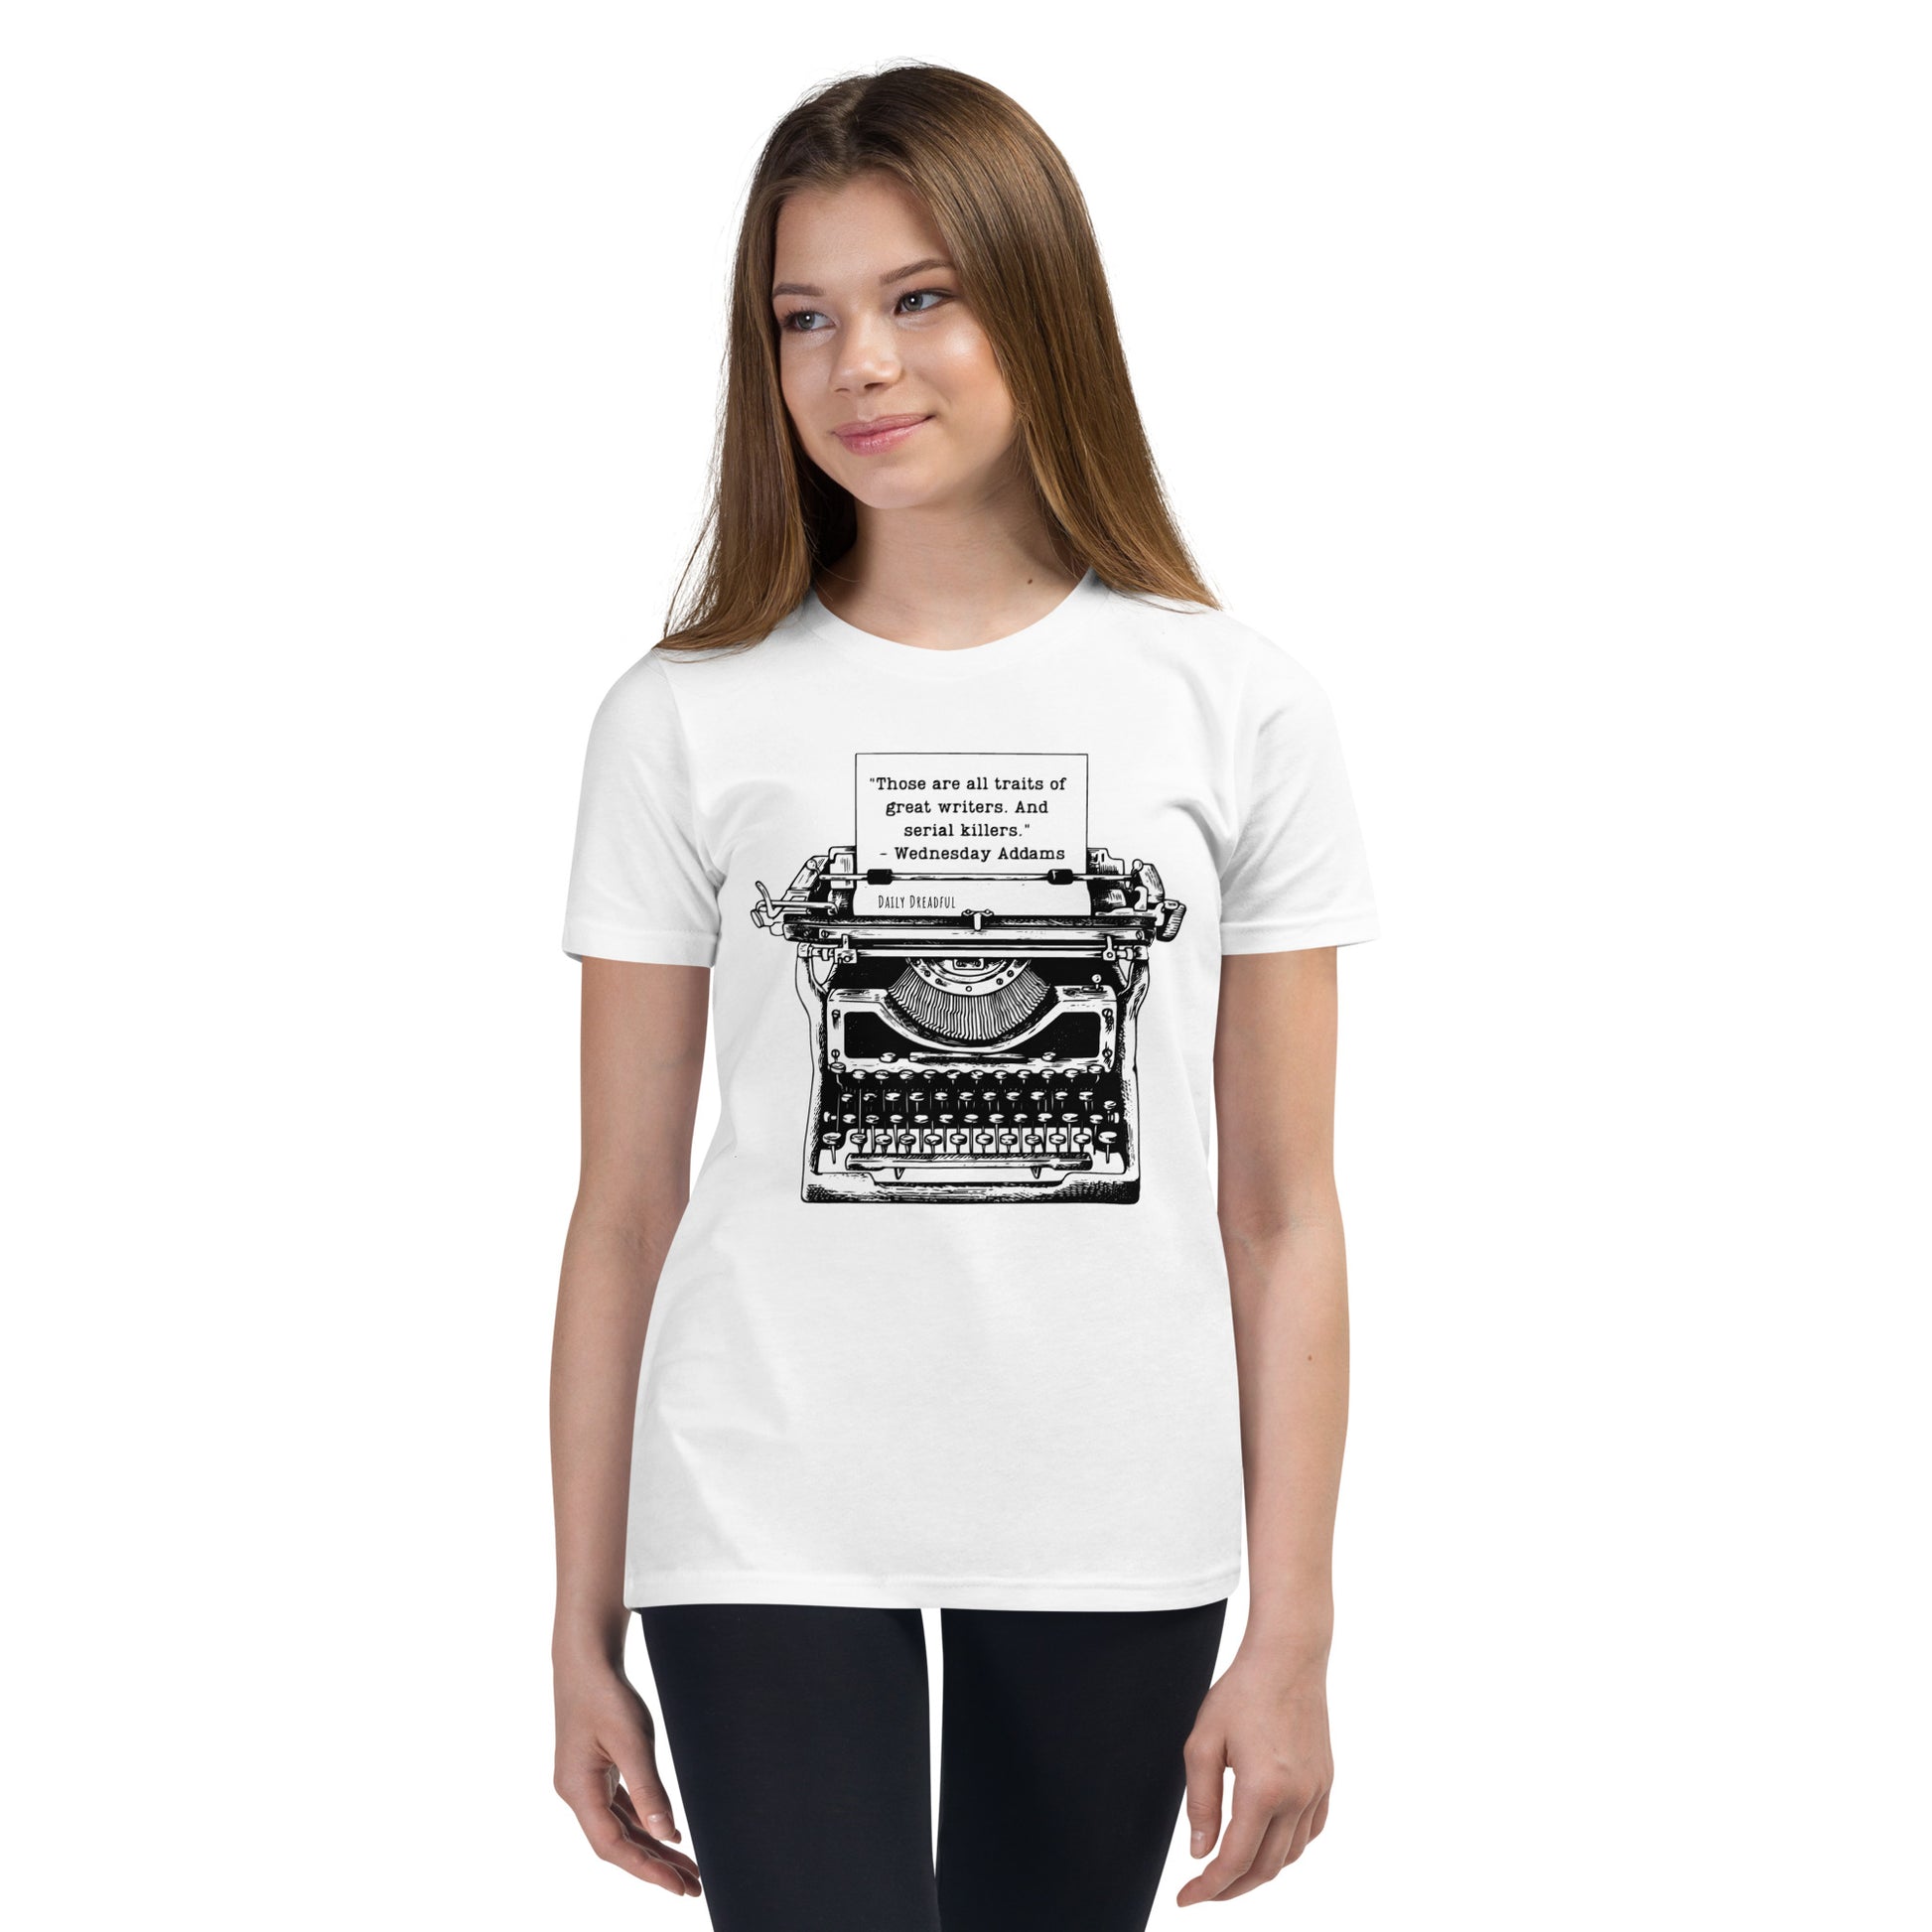 white "Wednesday Addams Typewriter" Youth Short Sleeve T-Shirt from Daily Dreadful